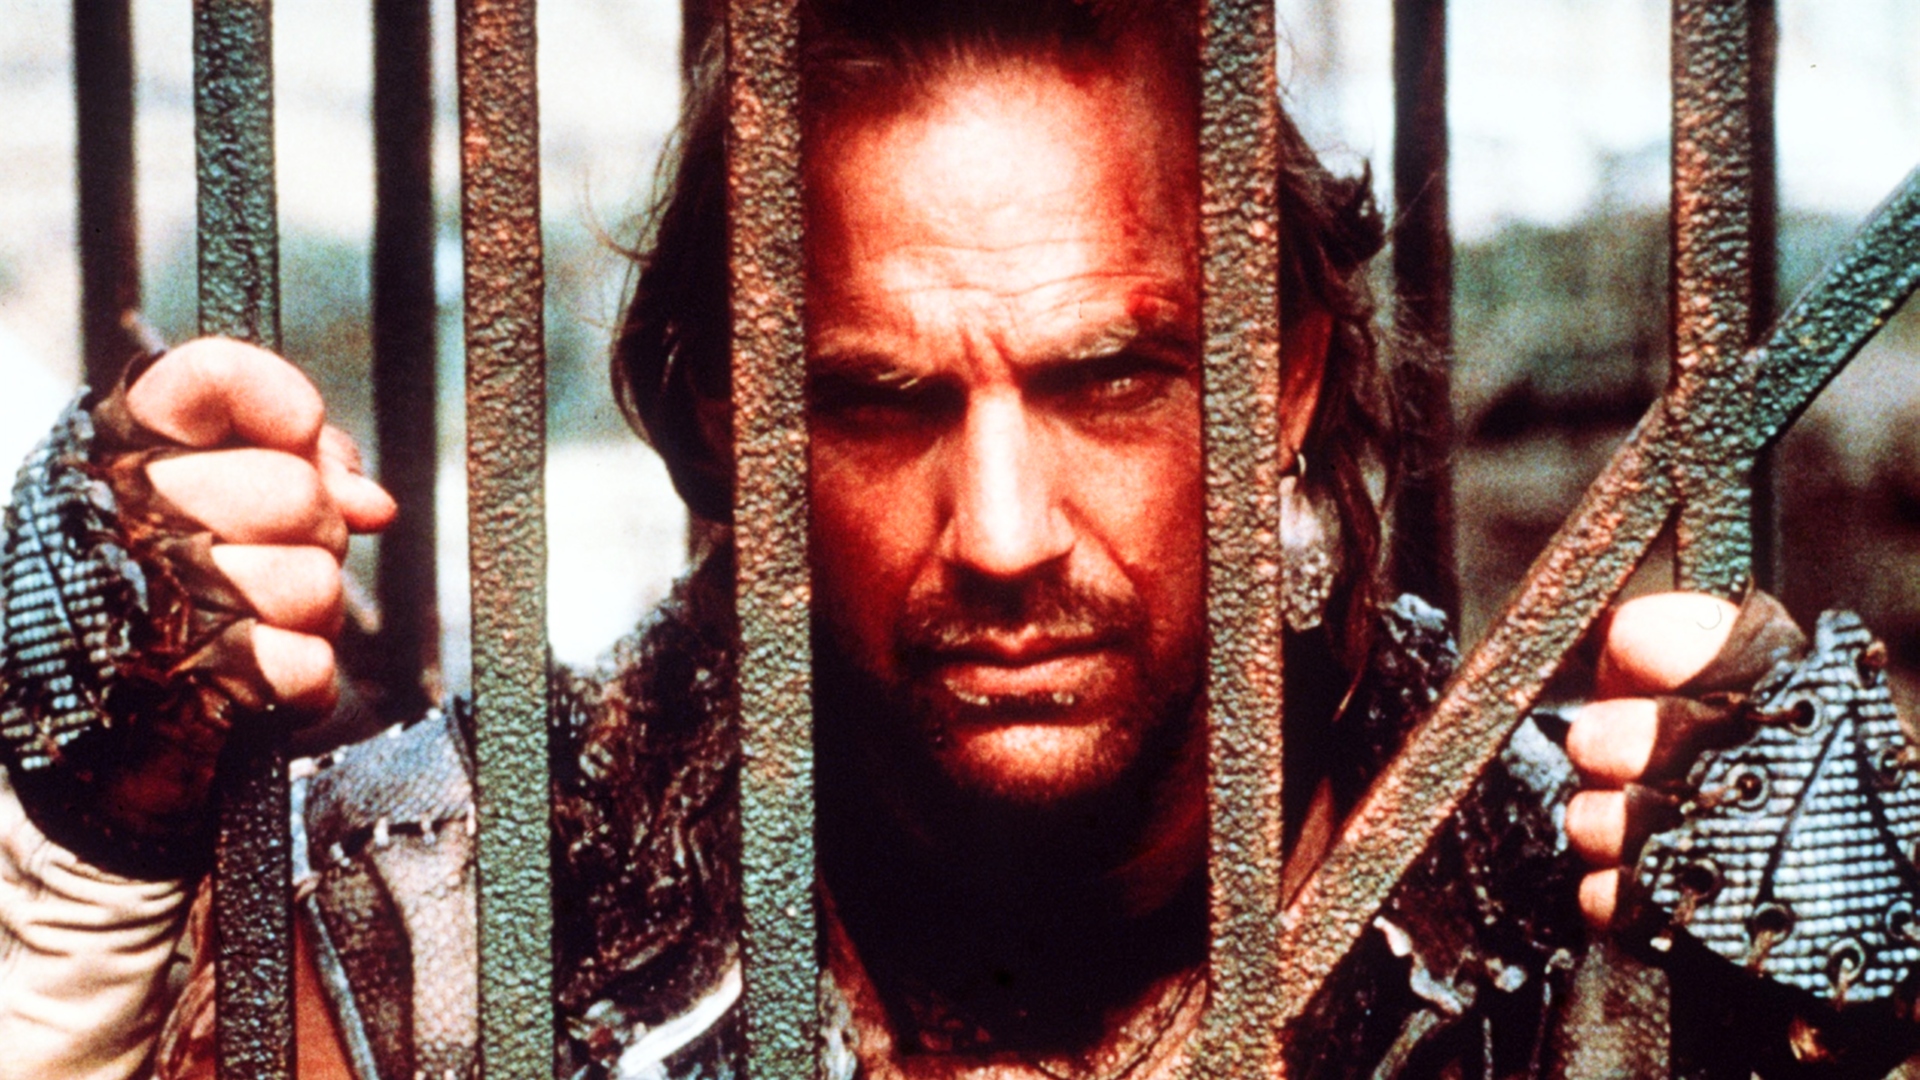 Waterworld Disaster Forced Kevin Costner to Turn Down a Role in Iconic Movie